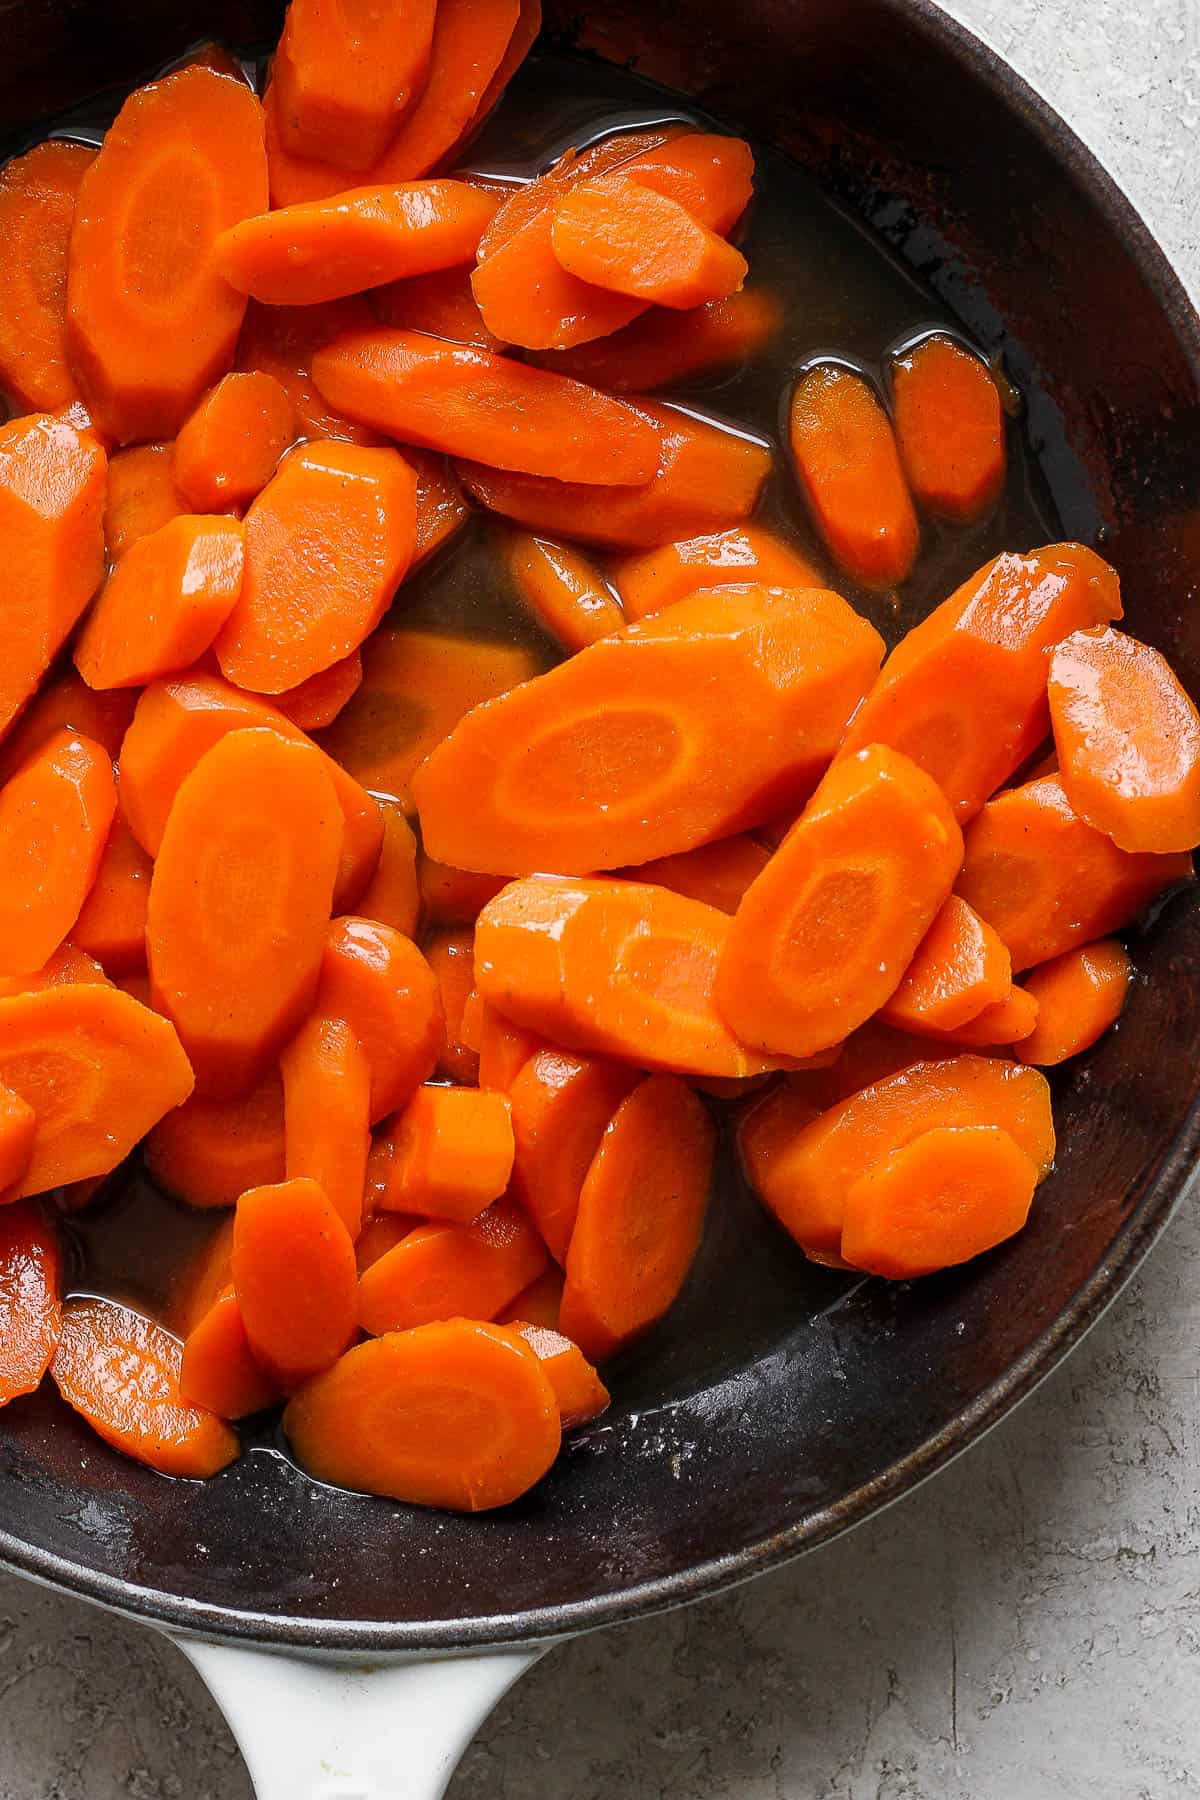 Carrots added to the skillet with the butter glaze.